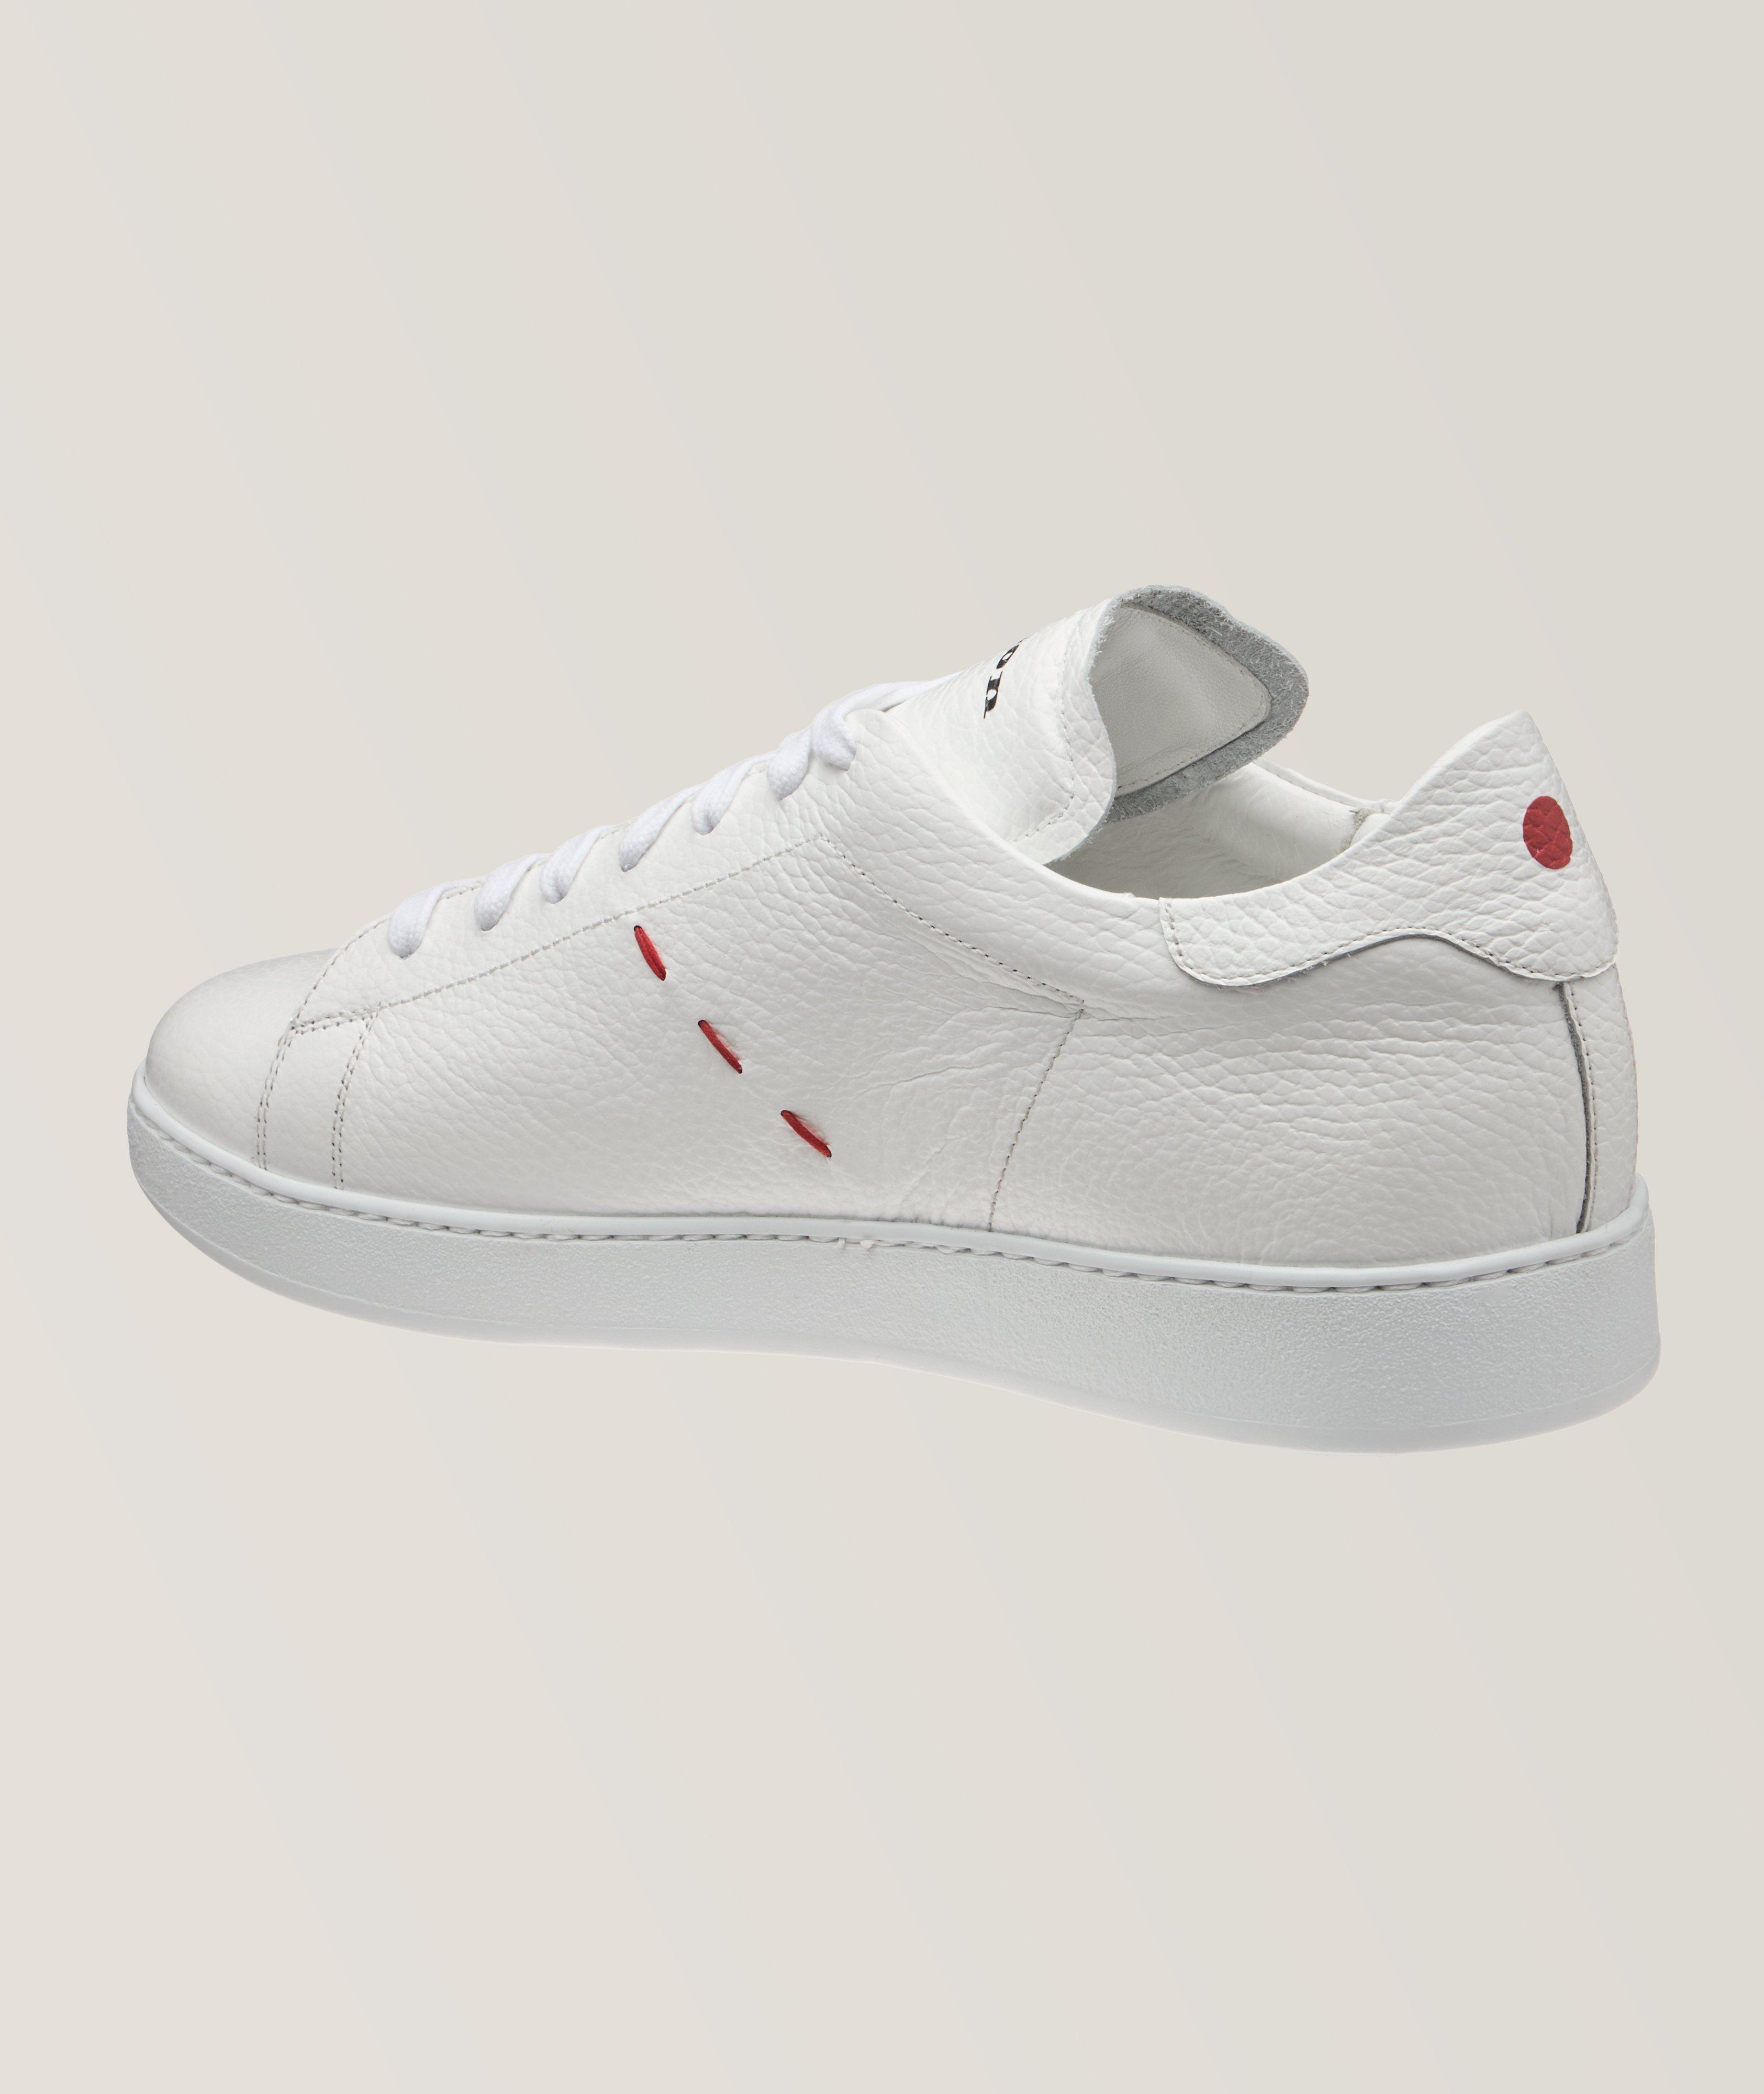 Pick Stitch Leather Sneakers image 1